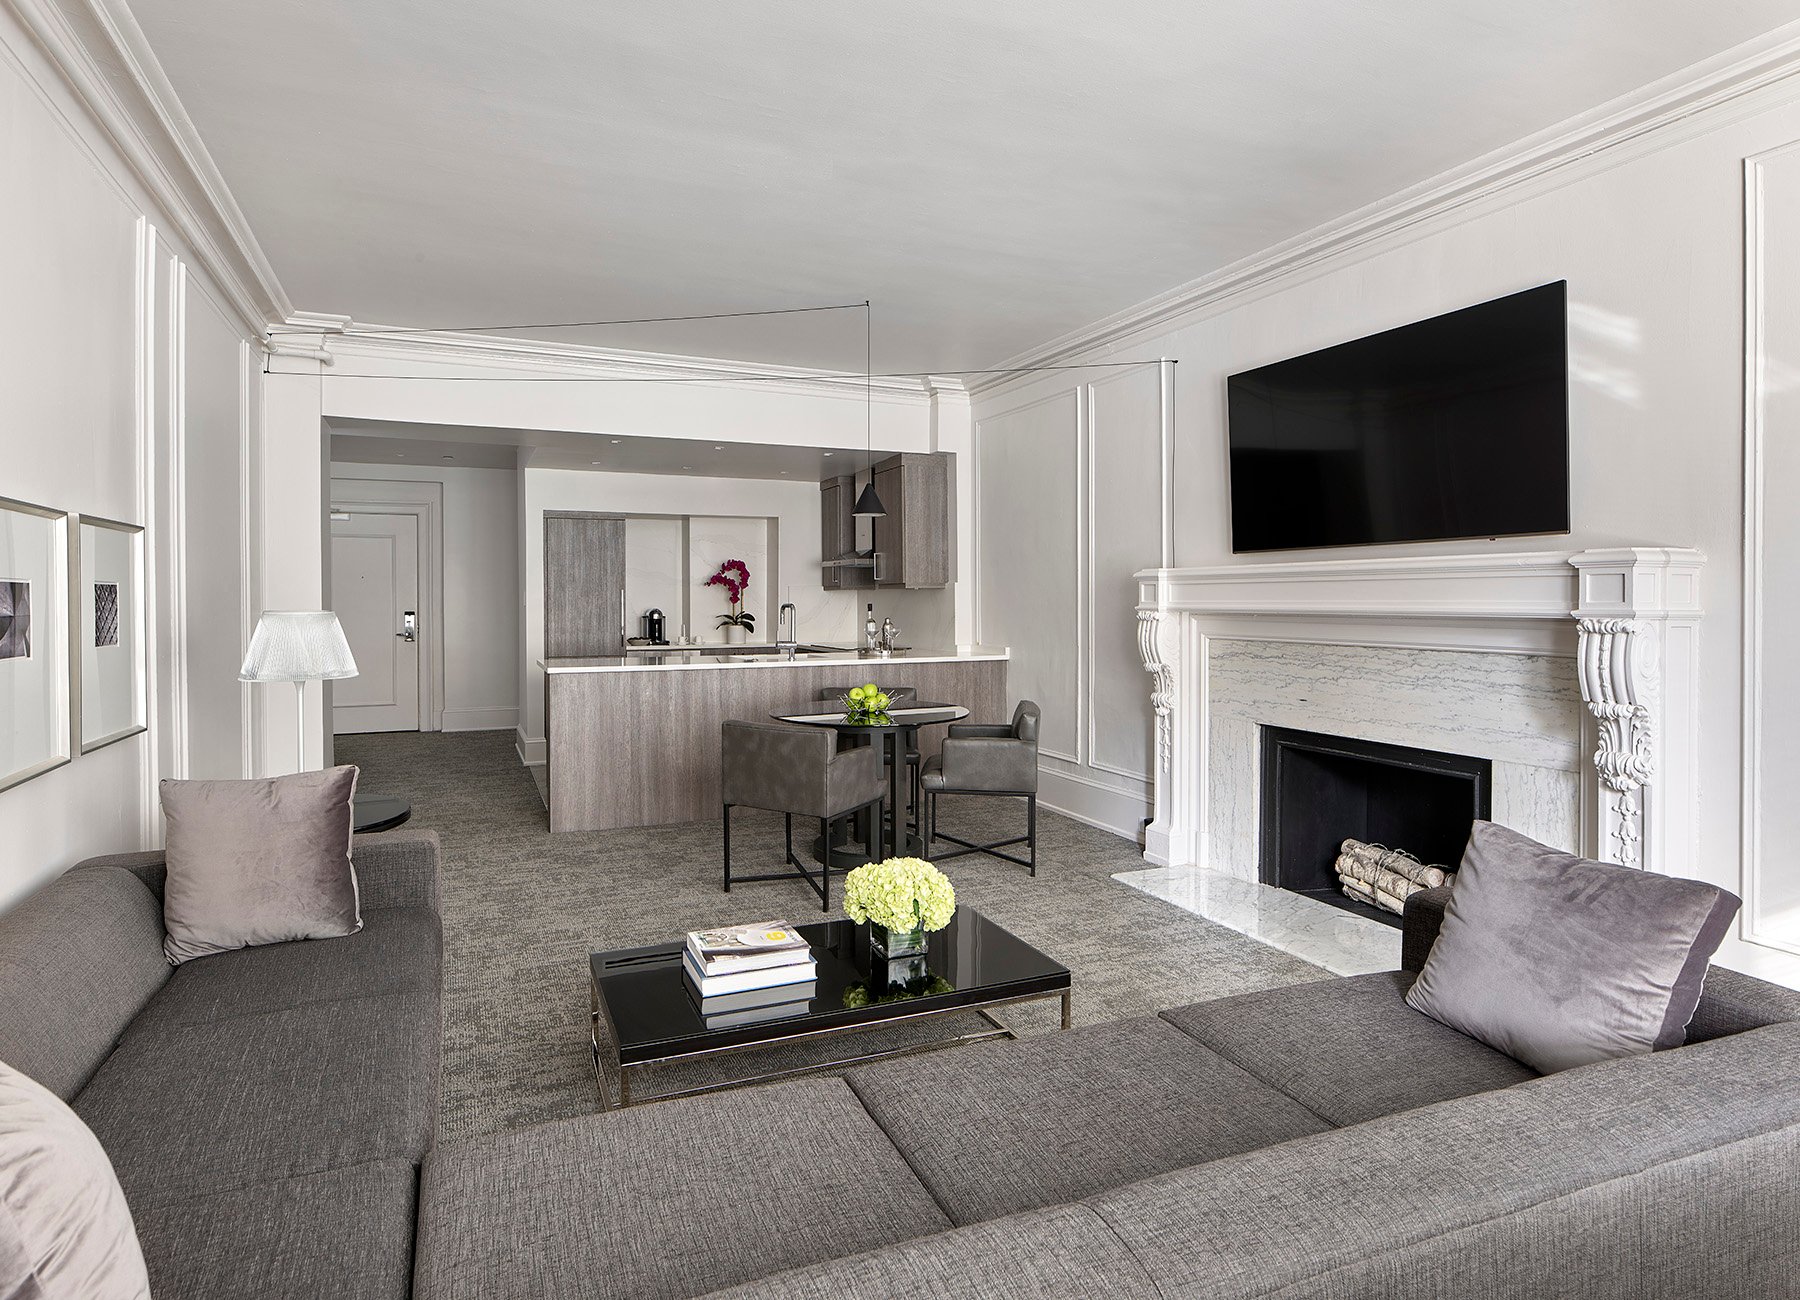 AKA Rittenhouse Square furnished suite with fireplace, living room, and open kitchen